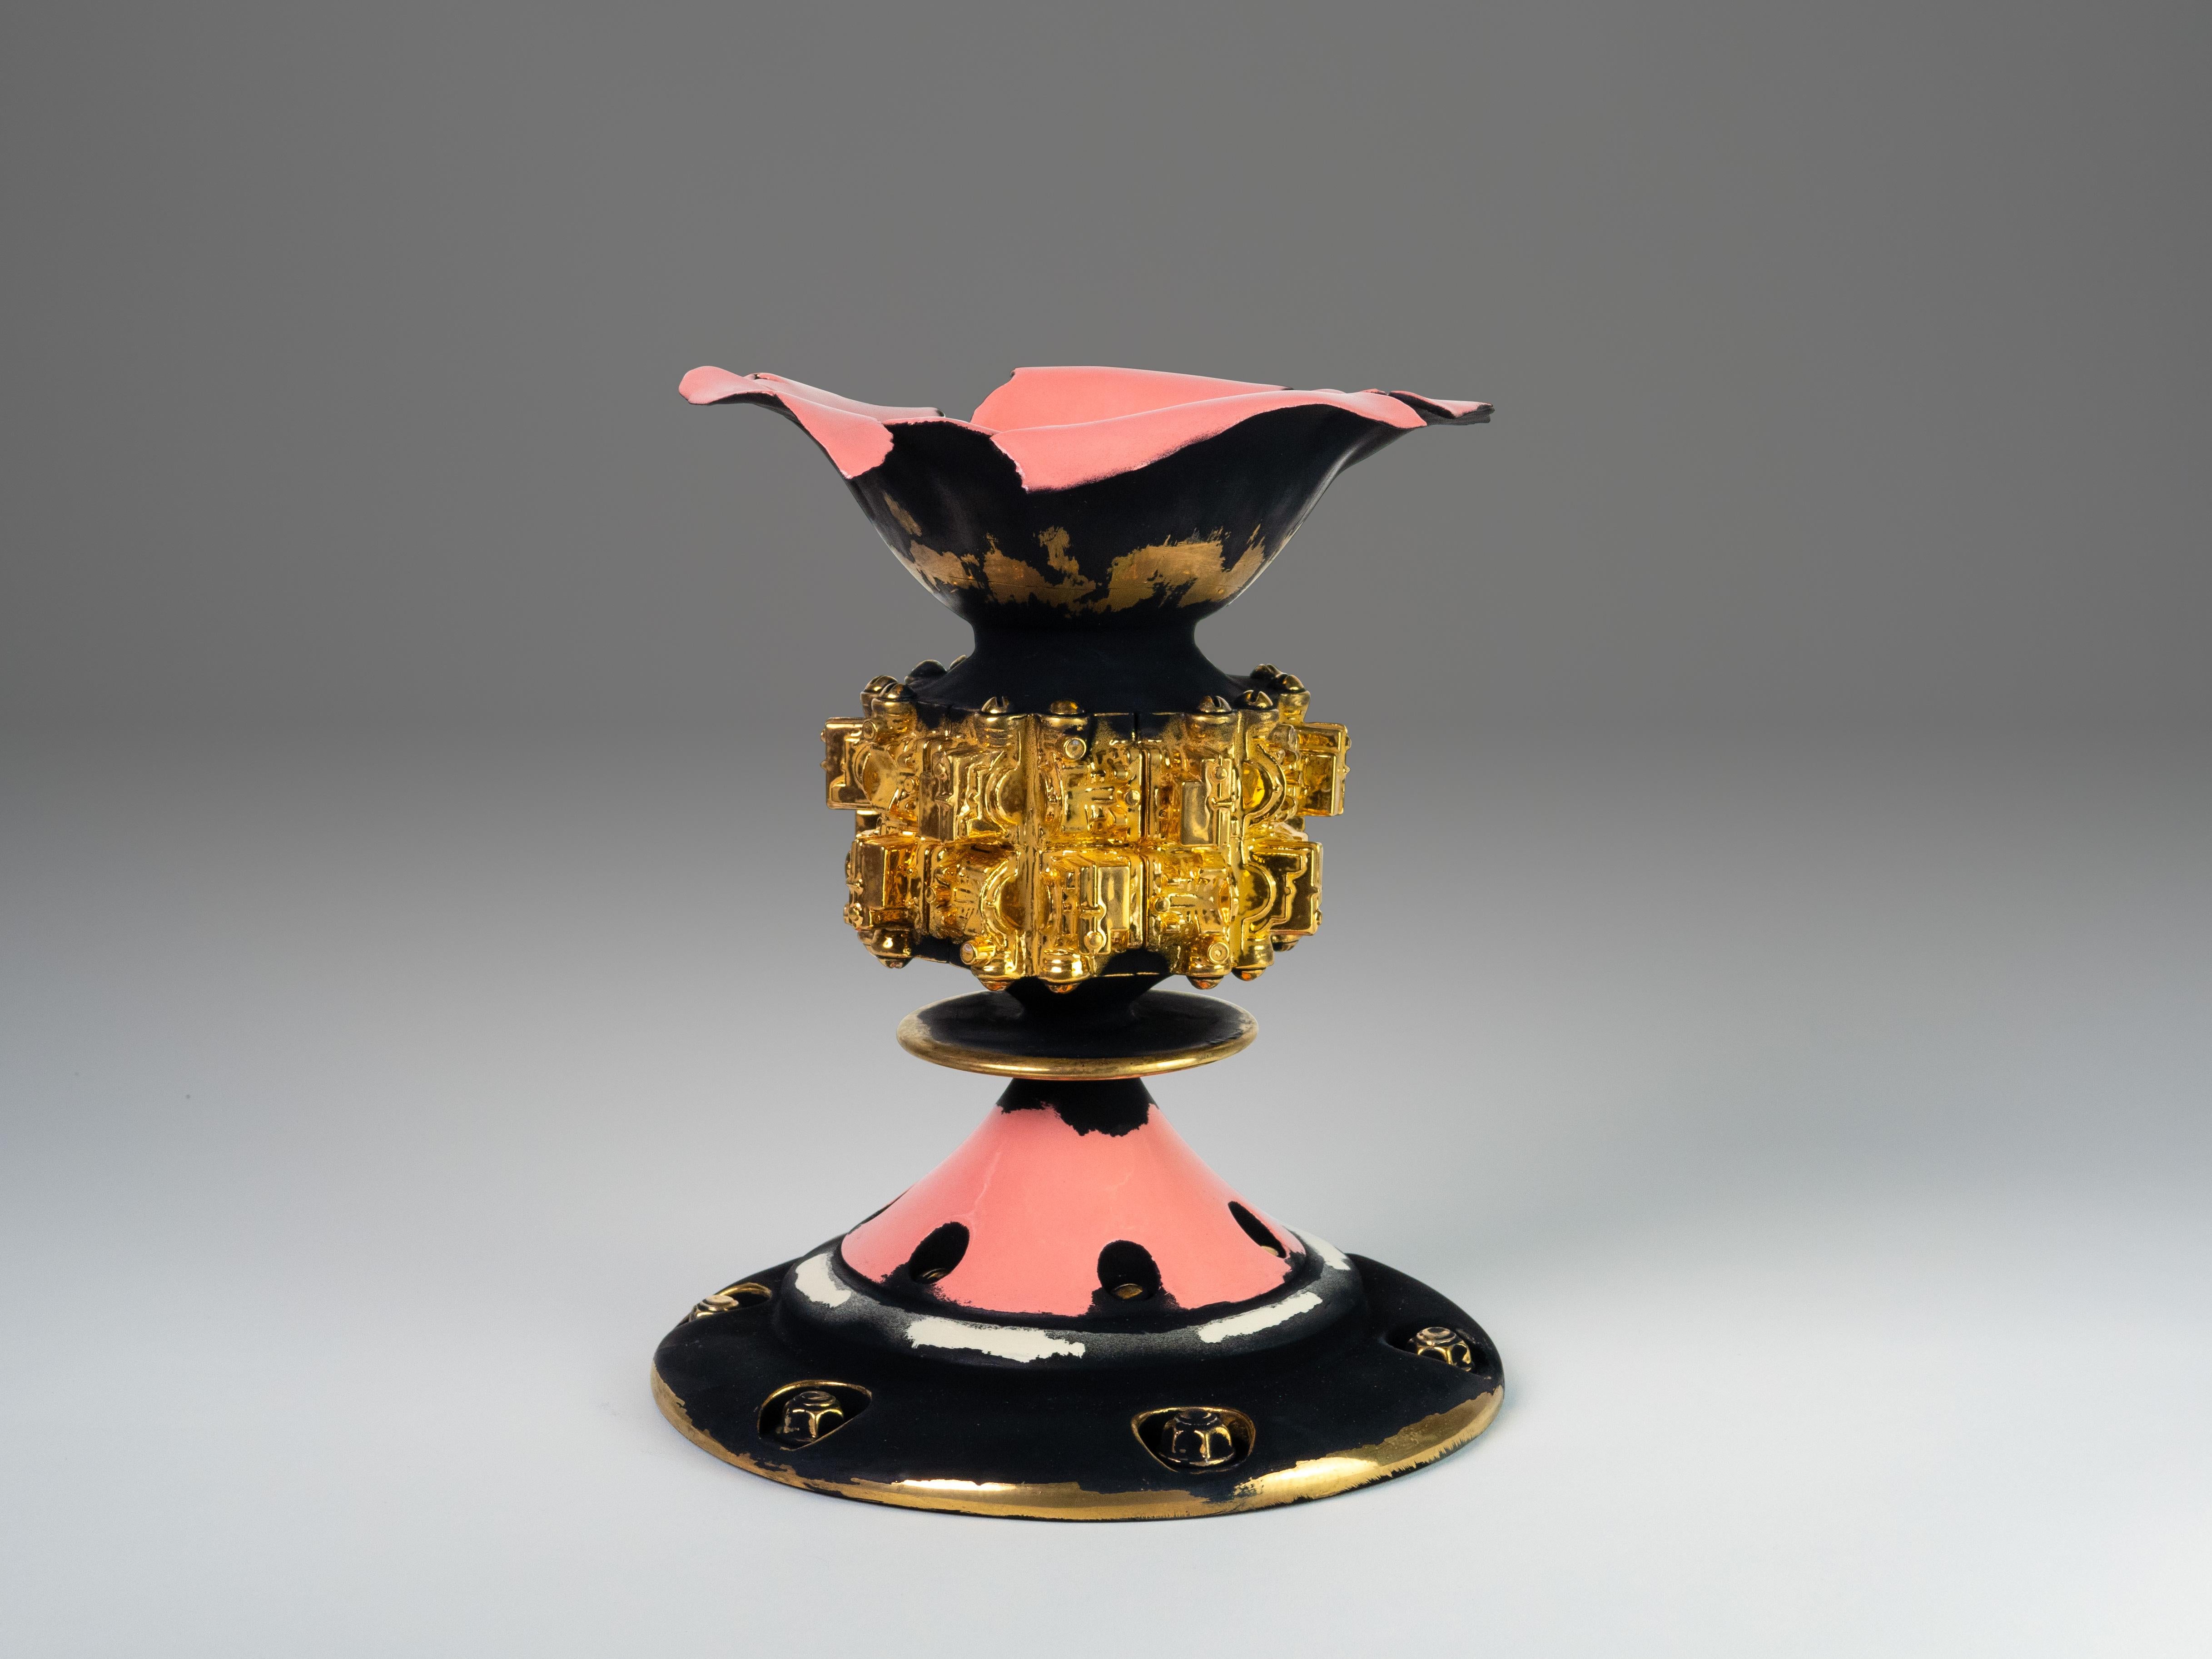 "Grail with Distress #3", Earthenware, Gold Luster, Paint, Ceramic, Glaze - Sculpture by Steven Montgomery